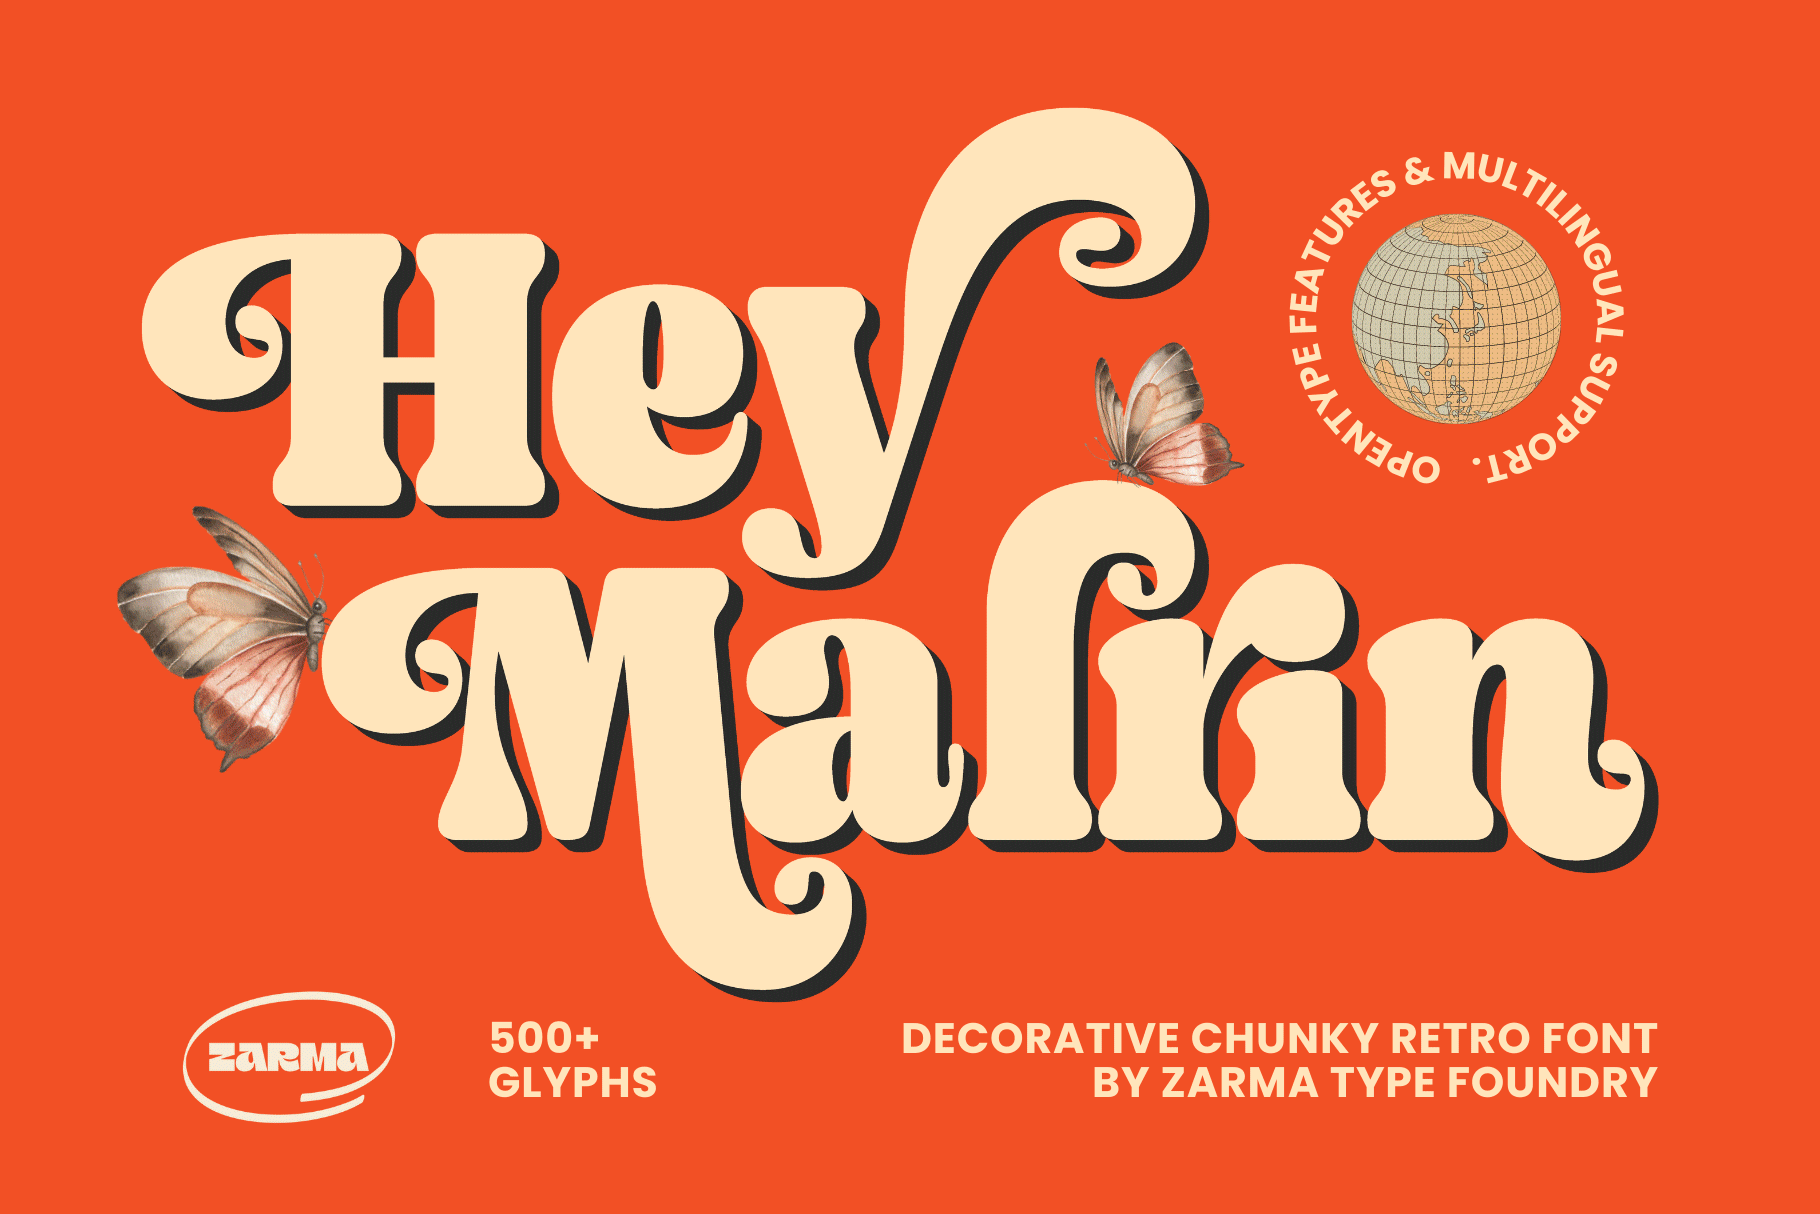 Malrin - Chunky Retro Font advertising font branding classic font design font font design fonts groovy groovy font logo logotype old font poster font psychedelic retro retro font typeface typography vintage vintage font